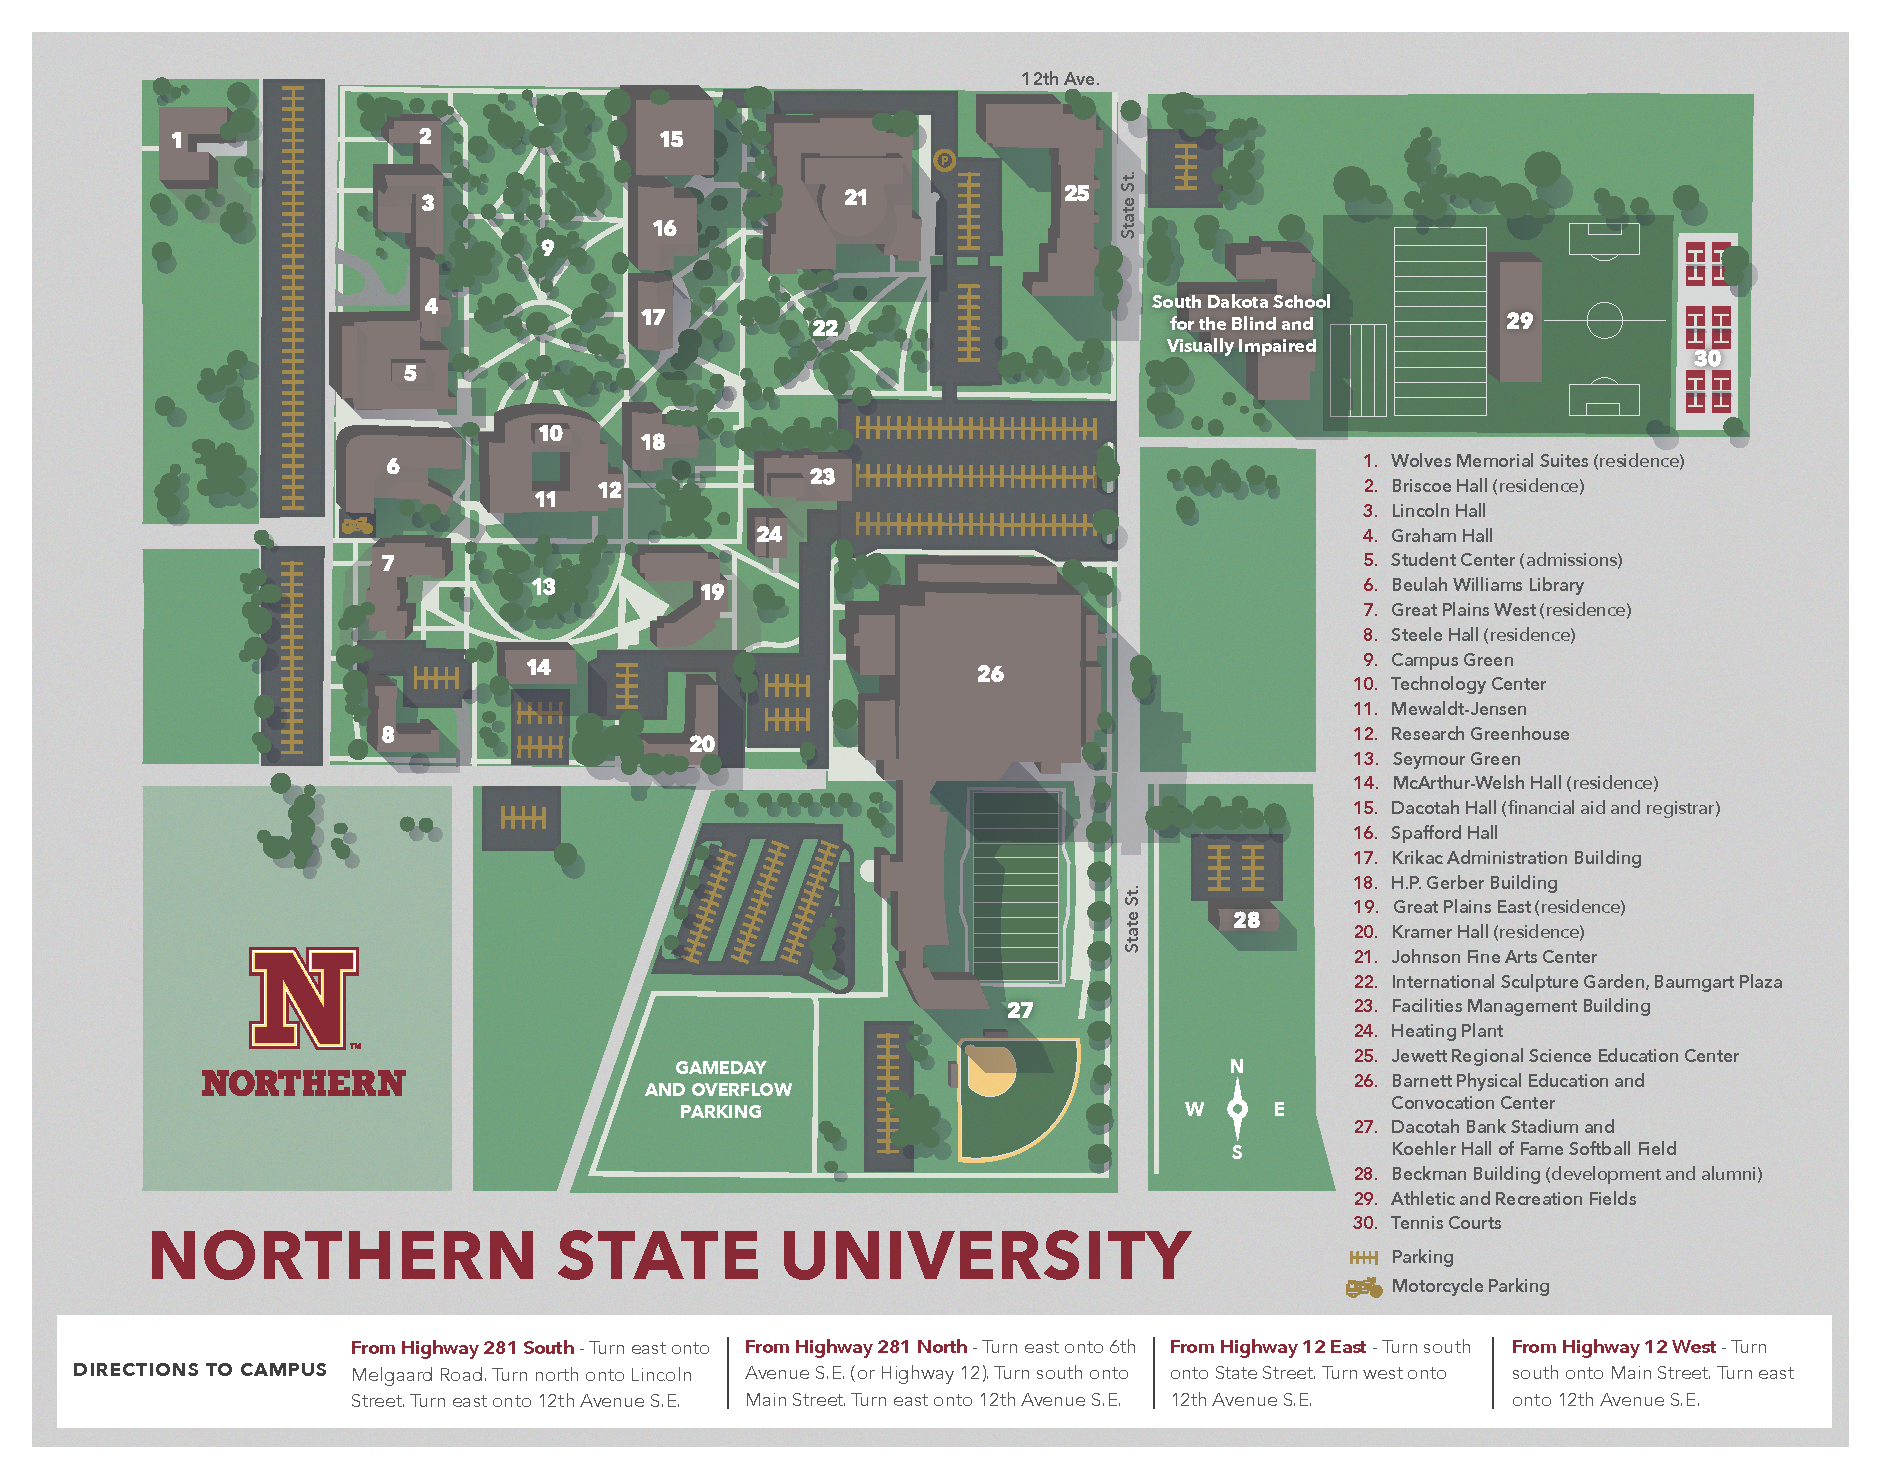 Image of NSU campus and parking locations